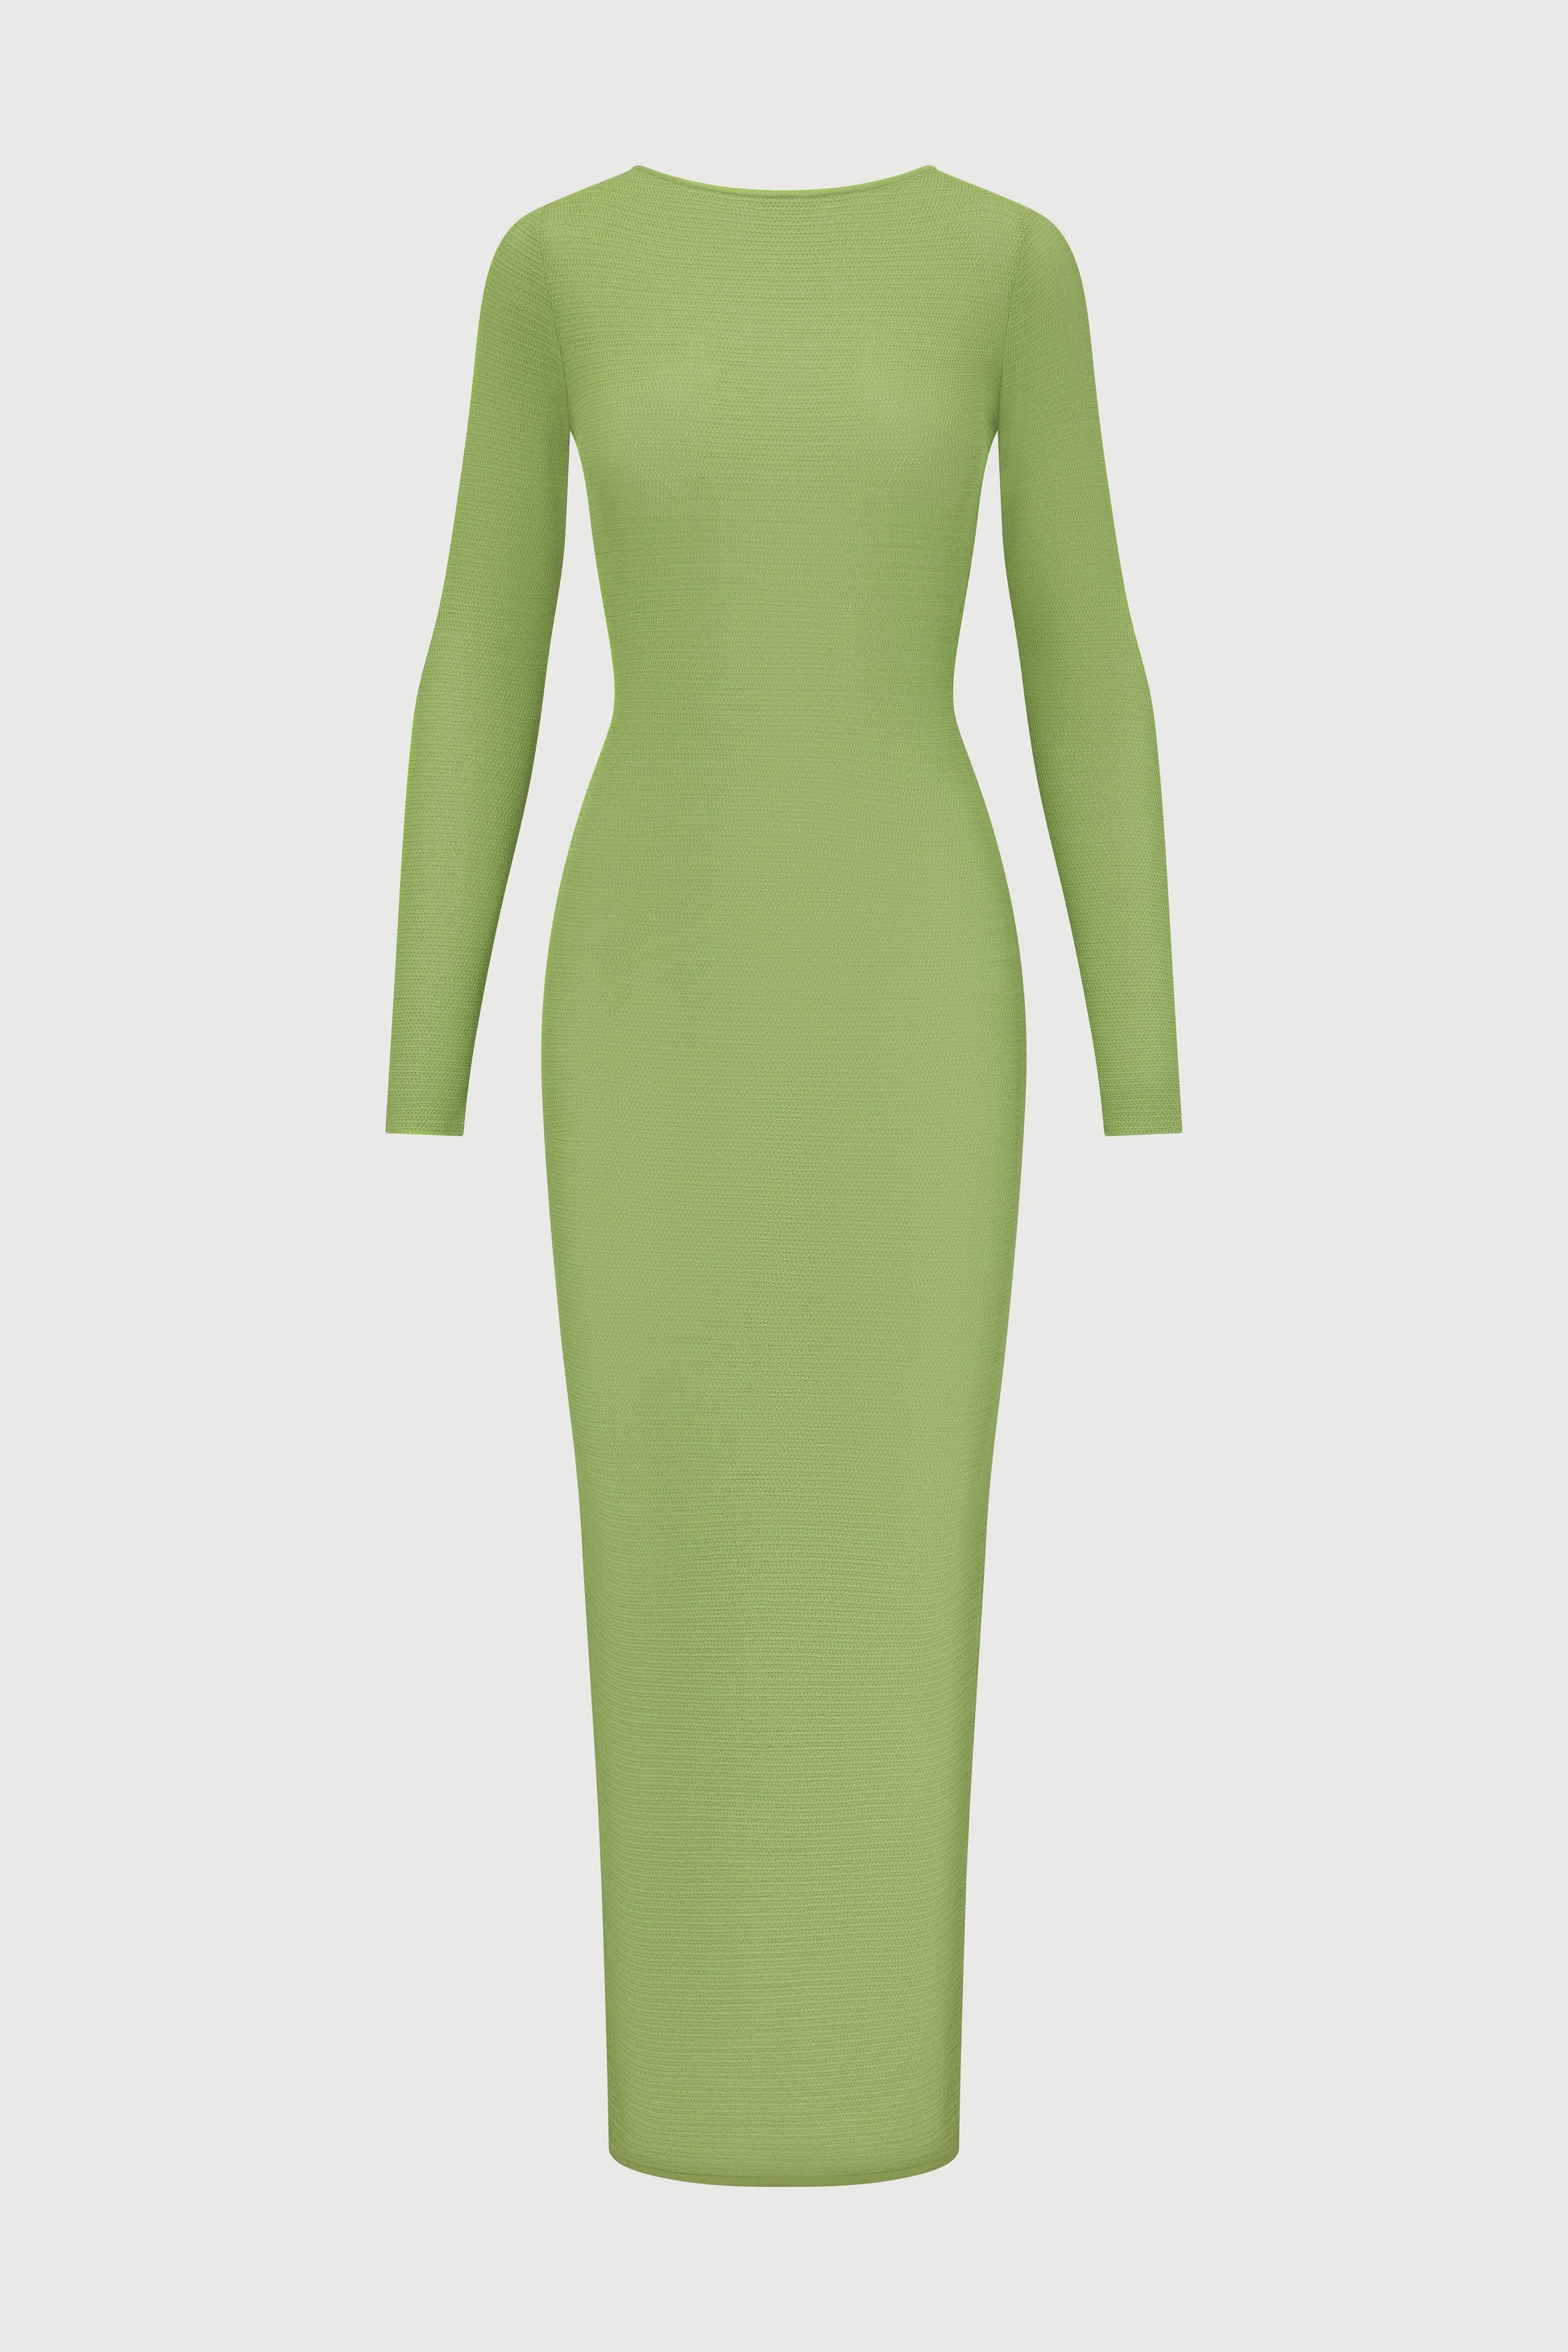 Lime green long-sleeved maxi dress on white background